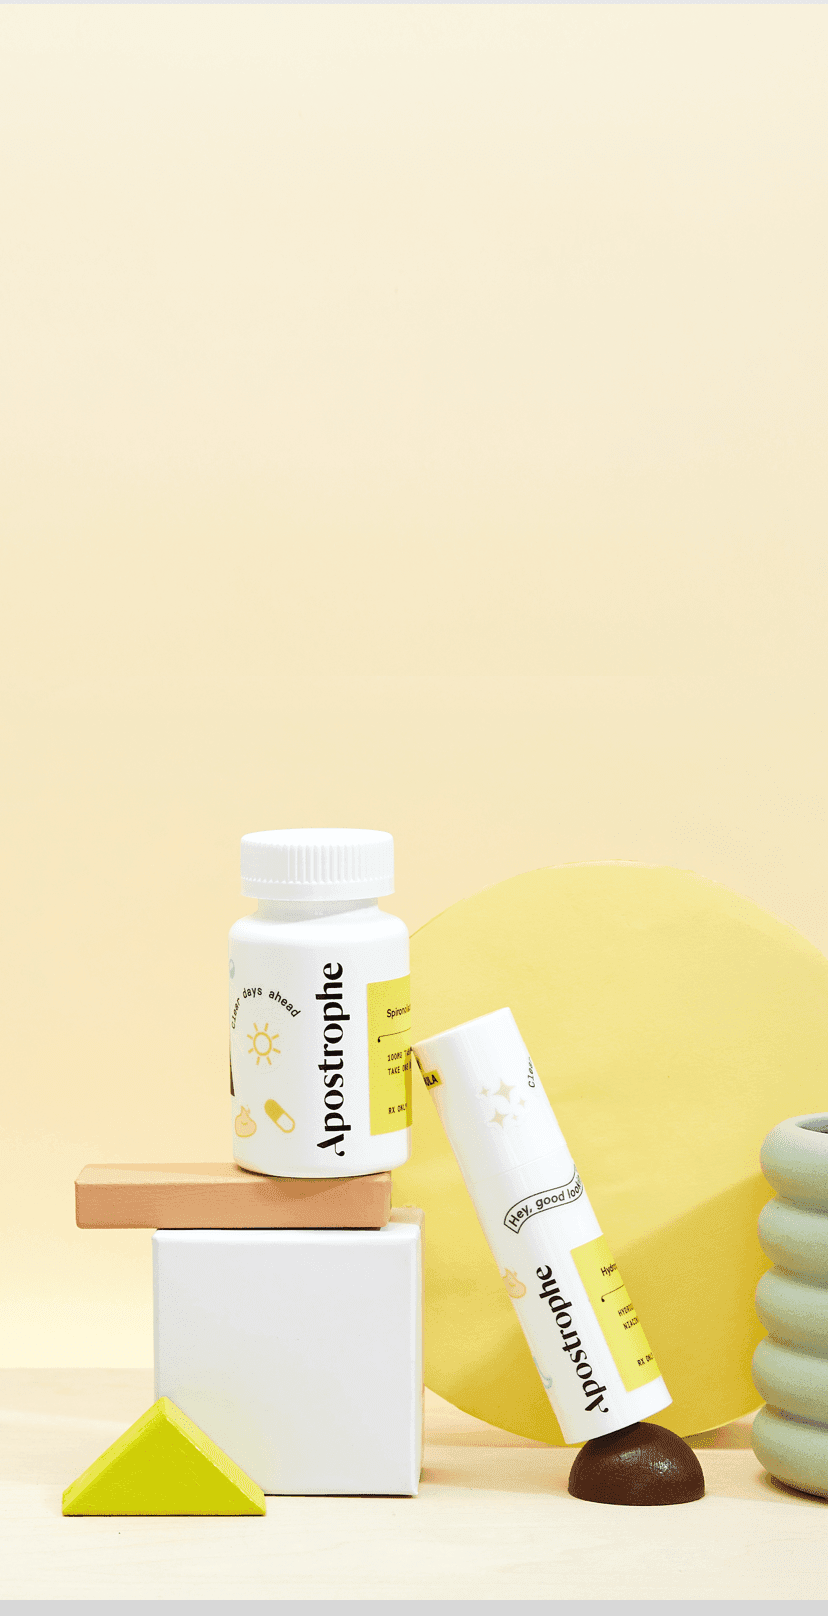 Apostrophe Oral medication and topical medication bottles stacked on shapes